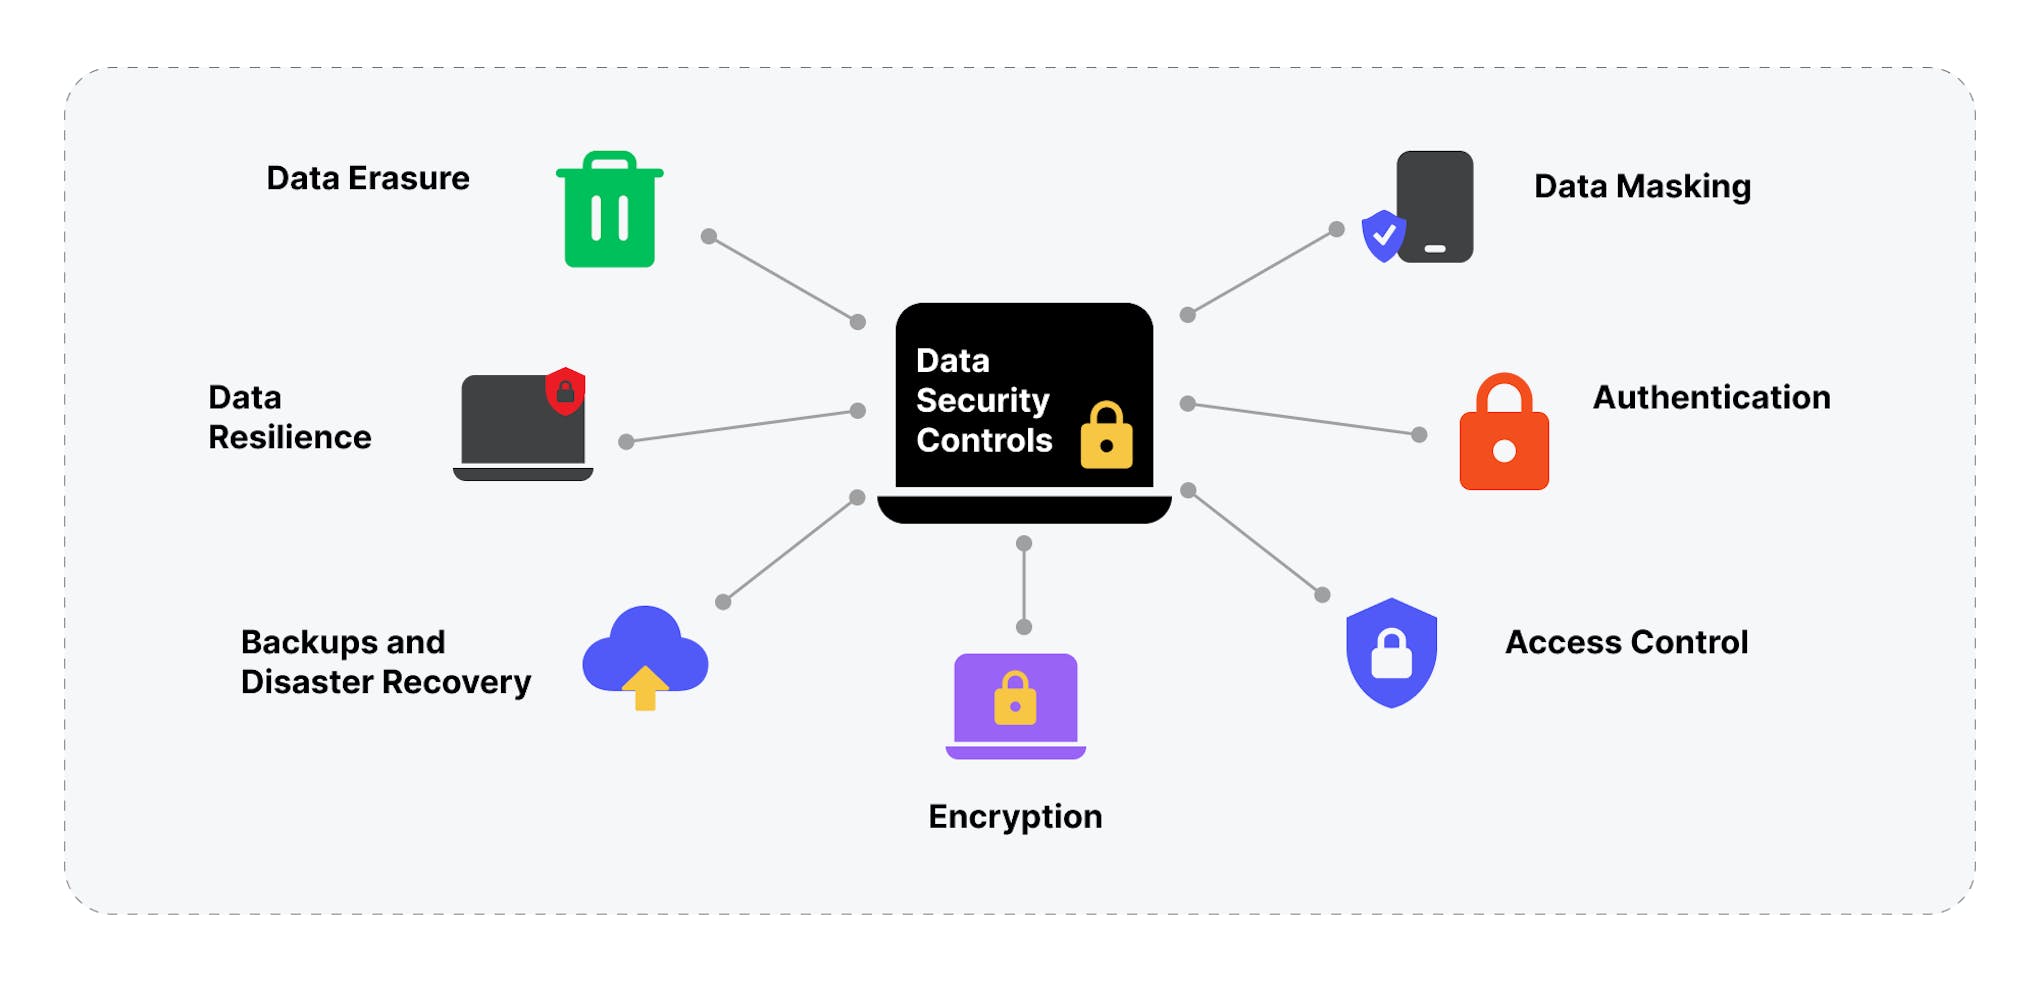 What types of data security controls
